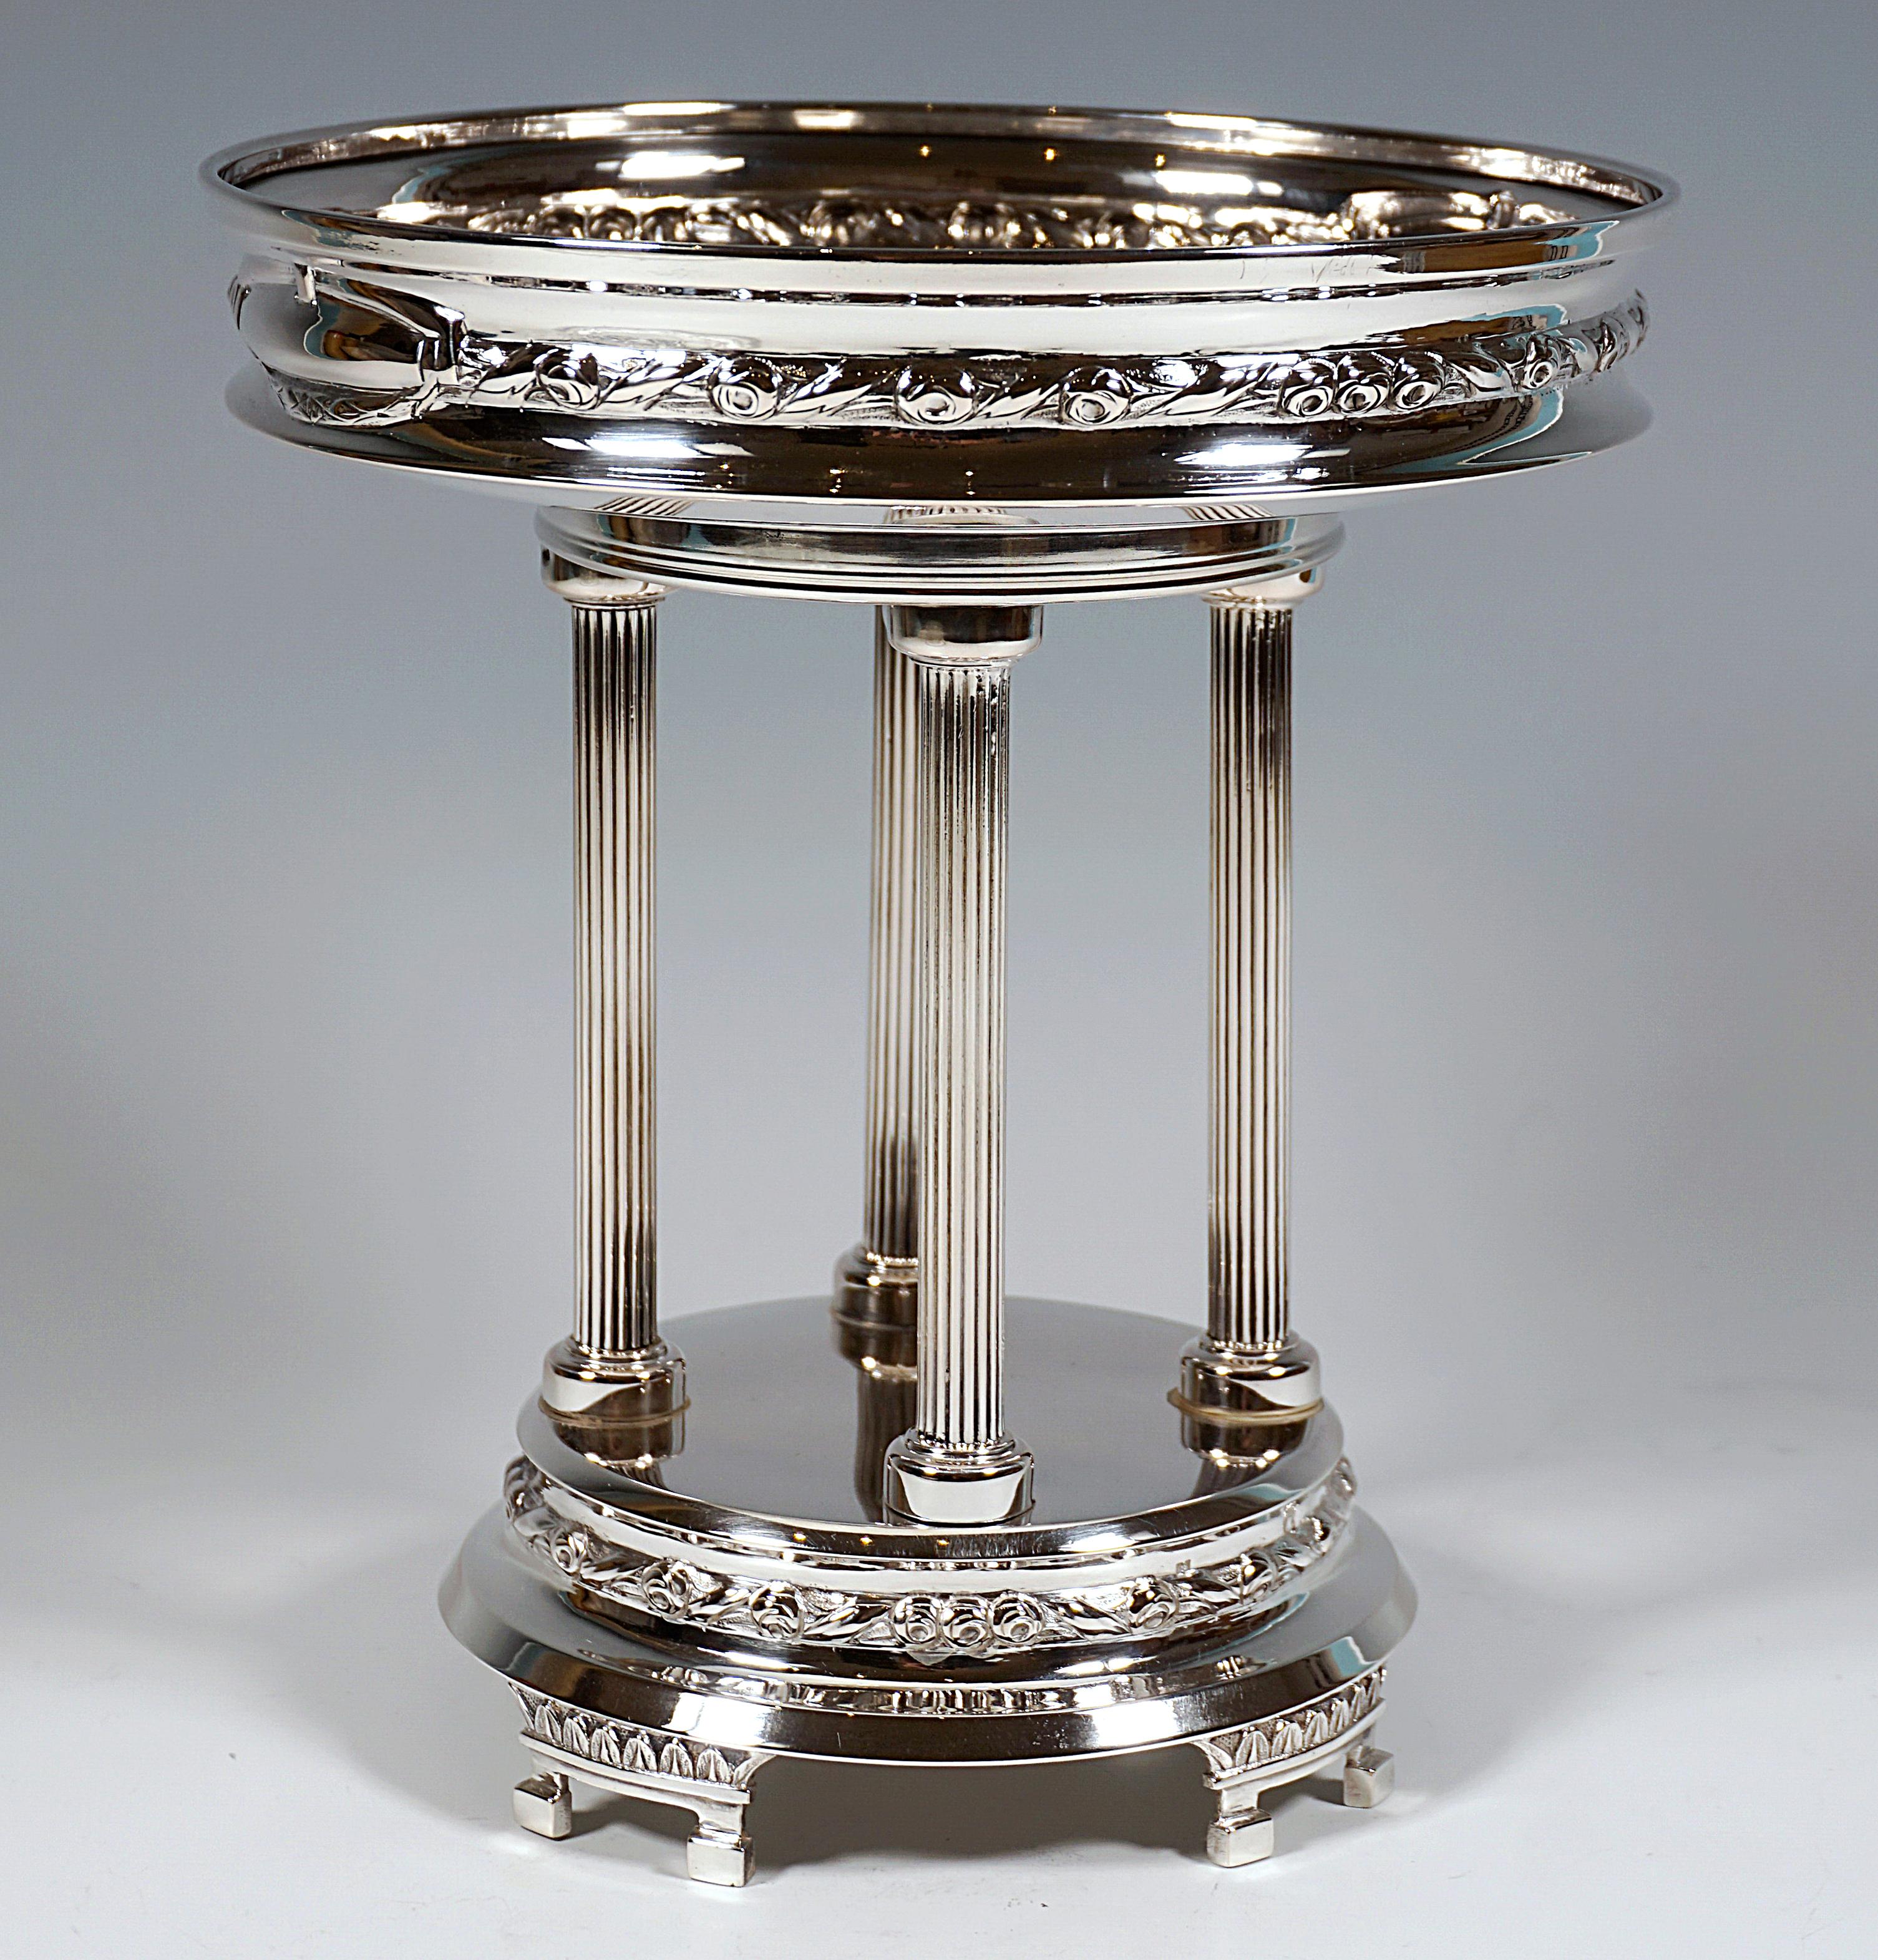 Hand-Crafted Pair Of Art Nouveau Silver Centerpieces With Glass Bowls, Vienna, Circa 1900 For Sale